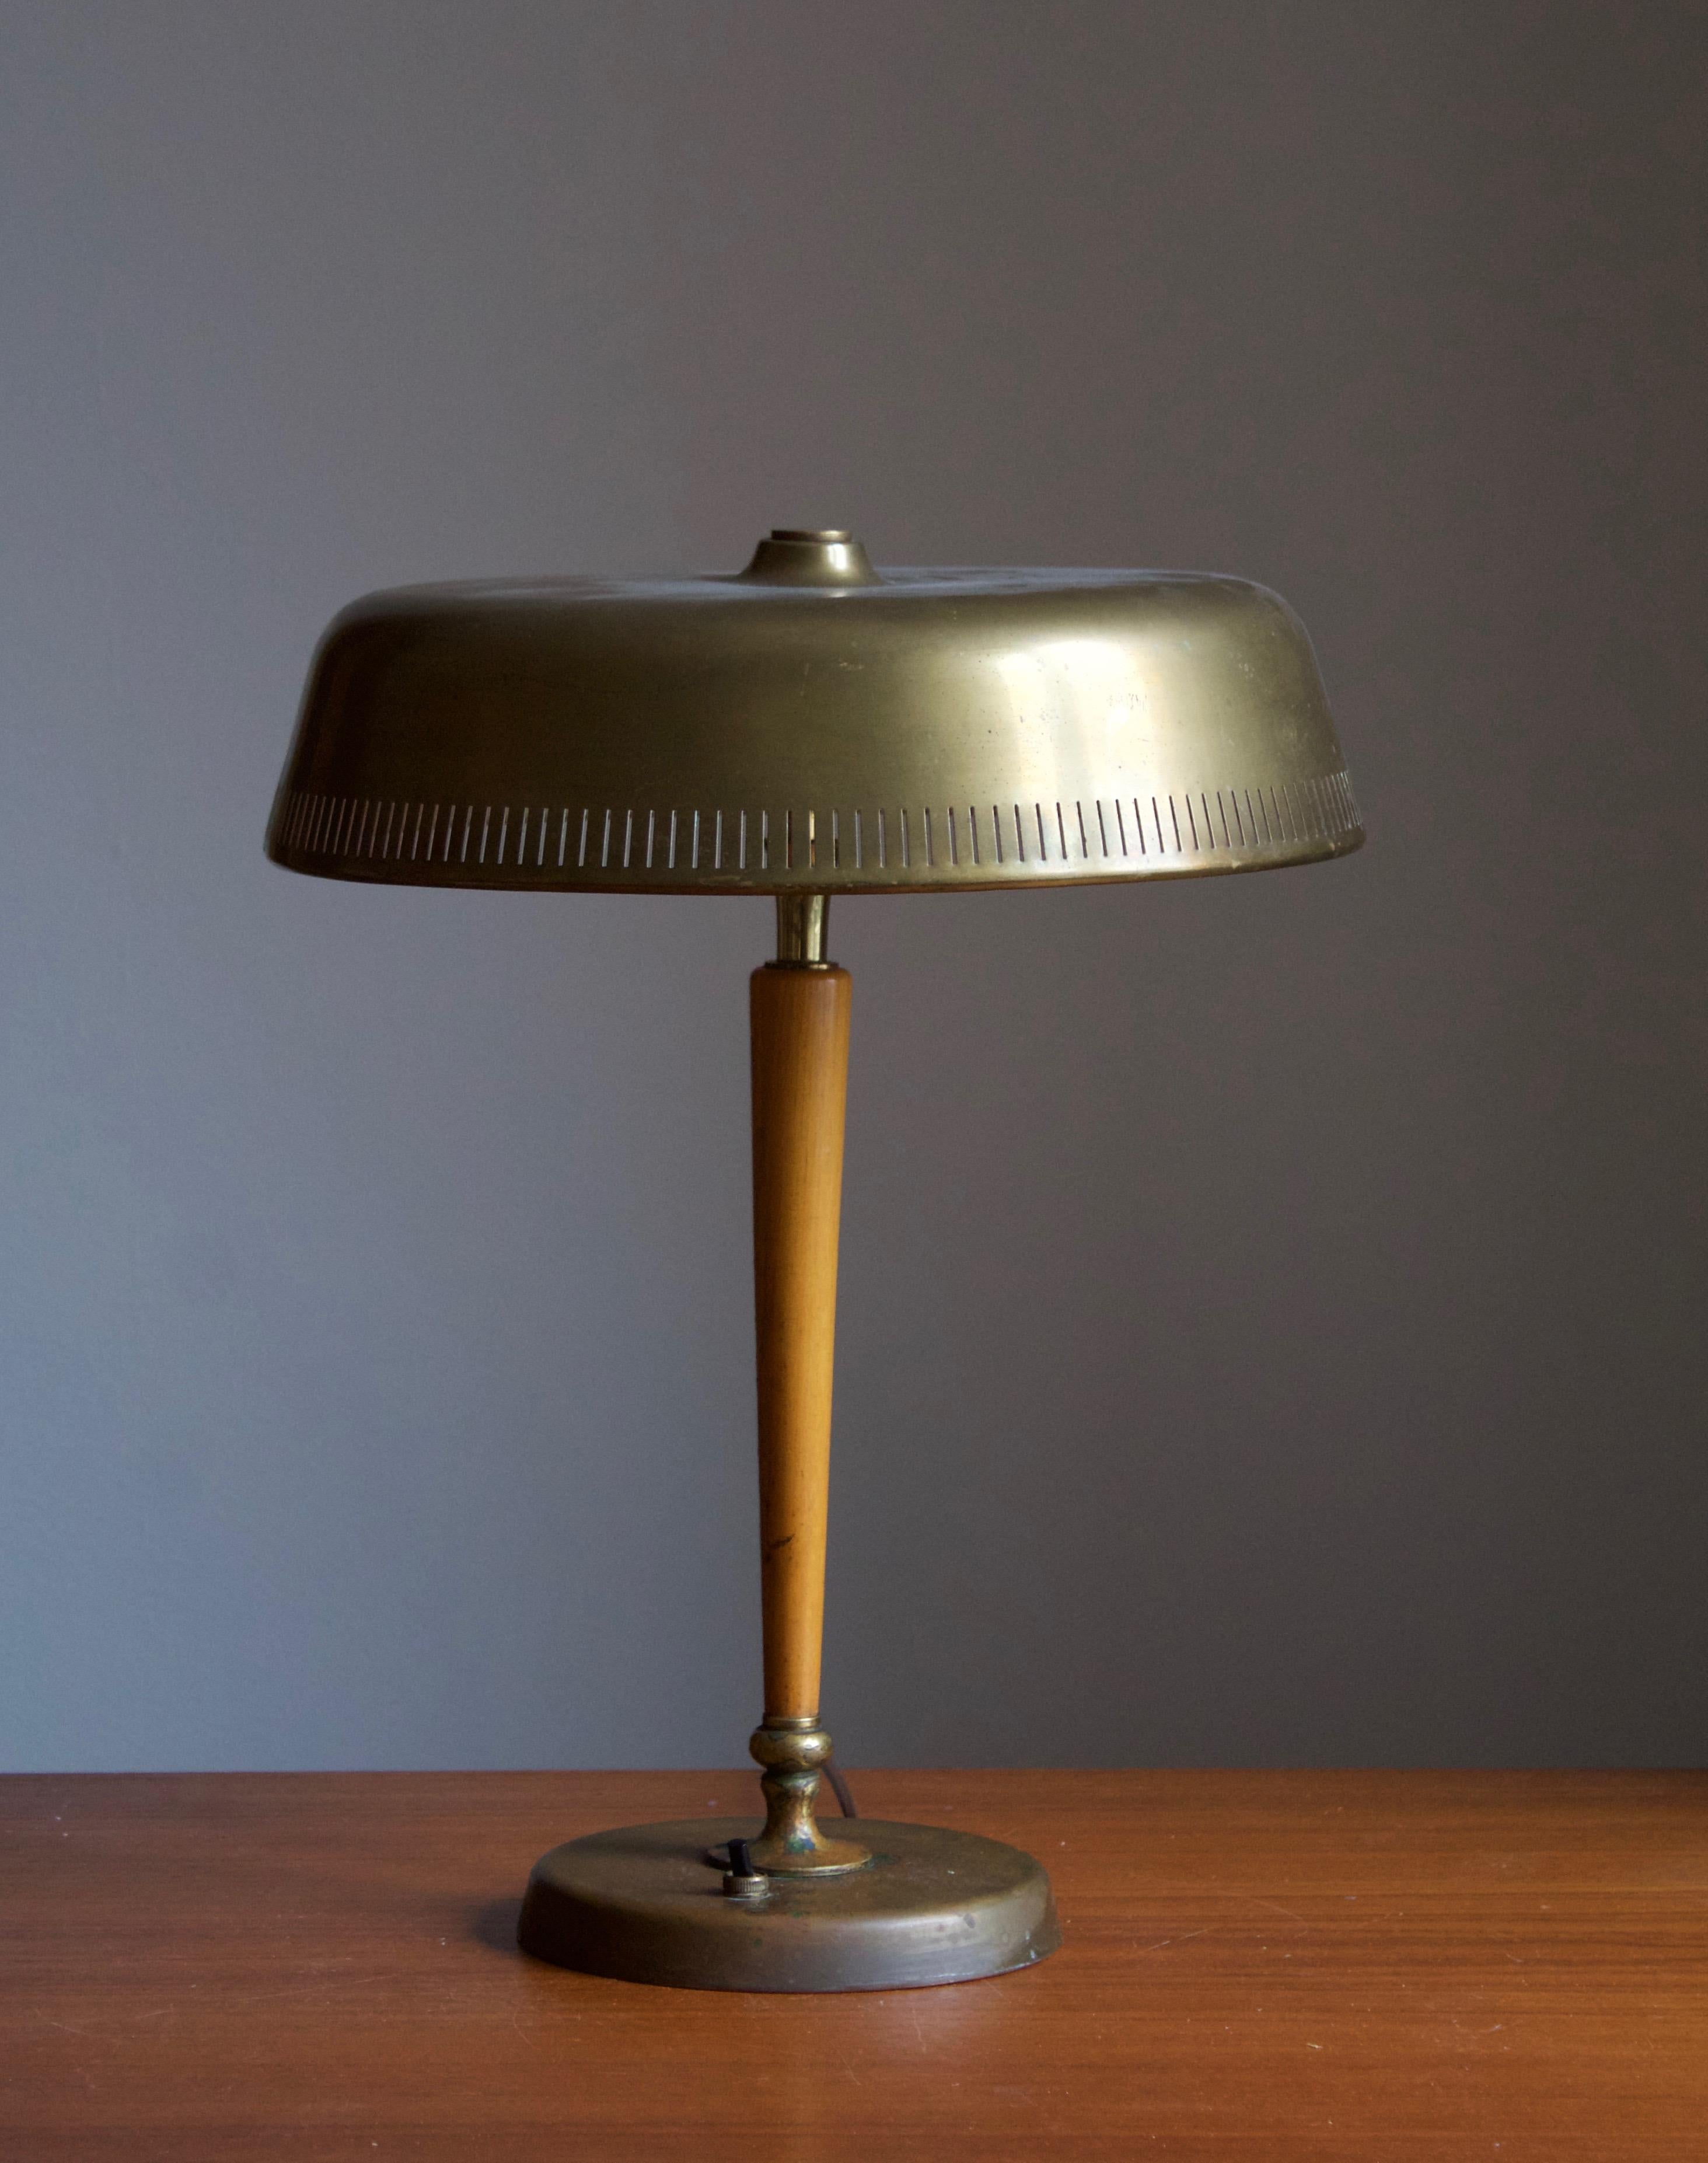 A modernist desk light / table lamp. Designed and produced by Bröderna Malmströms Metallvarufabrik, Malmö, Sweden, 1940s.

Other designers of the period include Harald Notini, Carl-Axel Acking, Paavo Tynell, and Alvar Aalto.